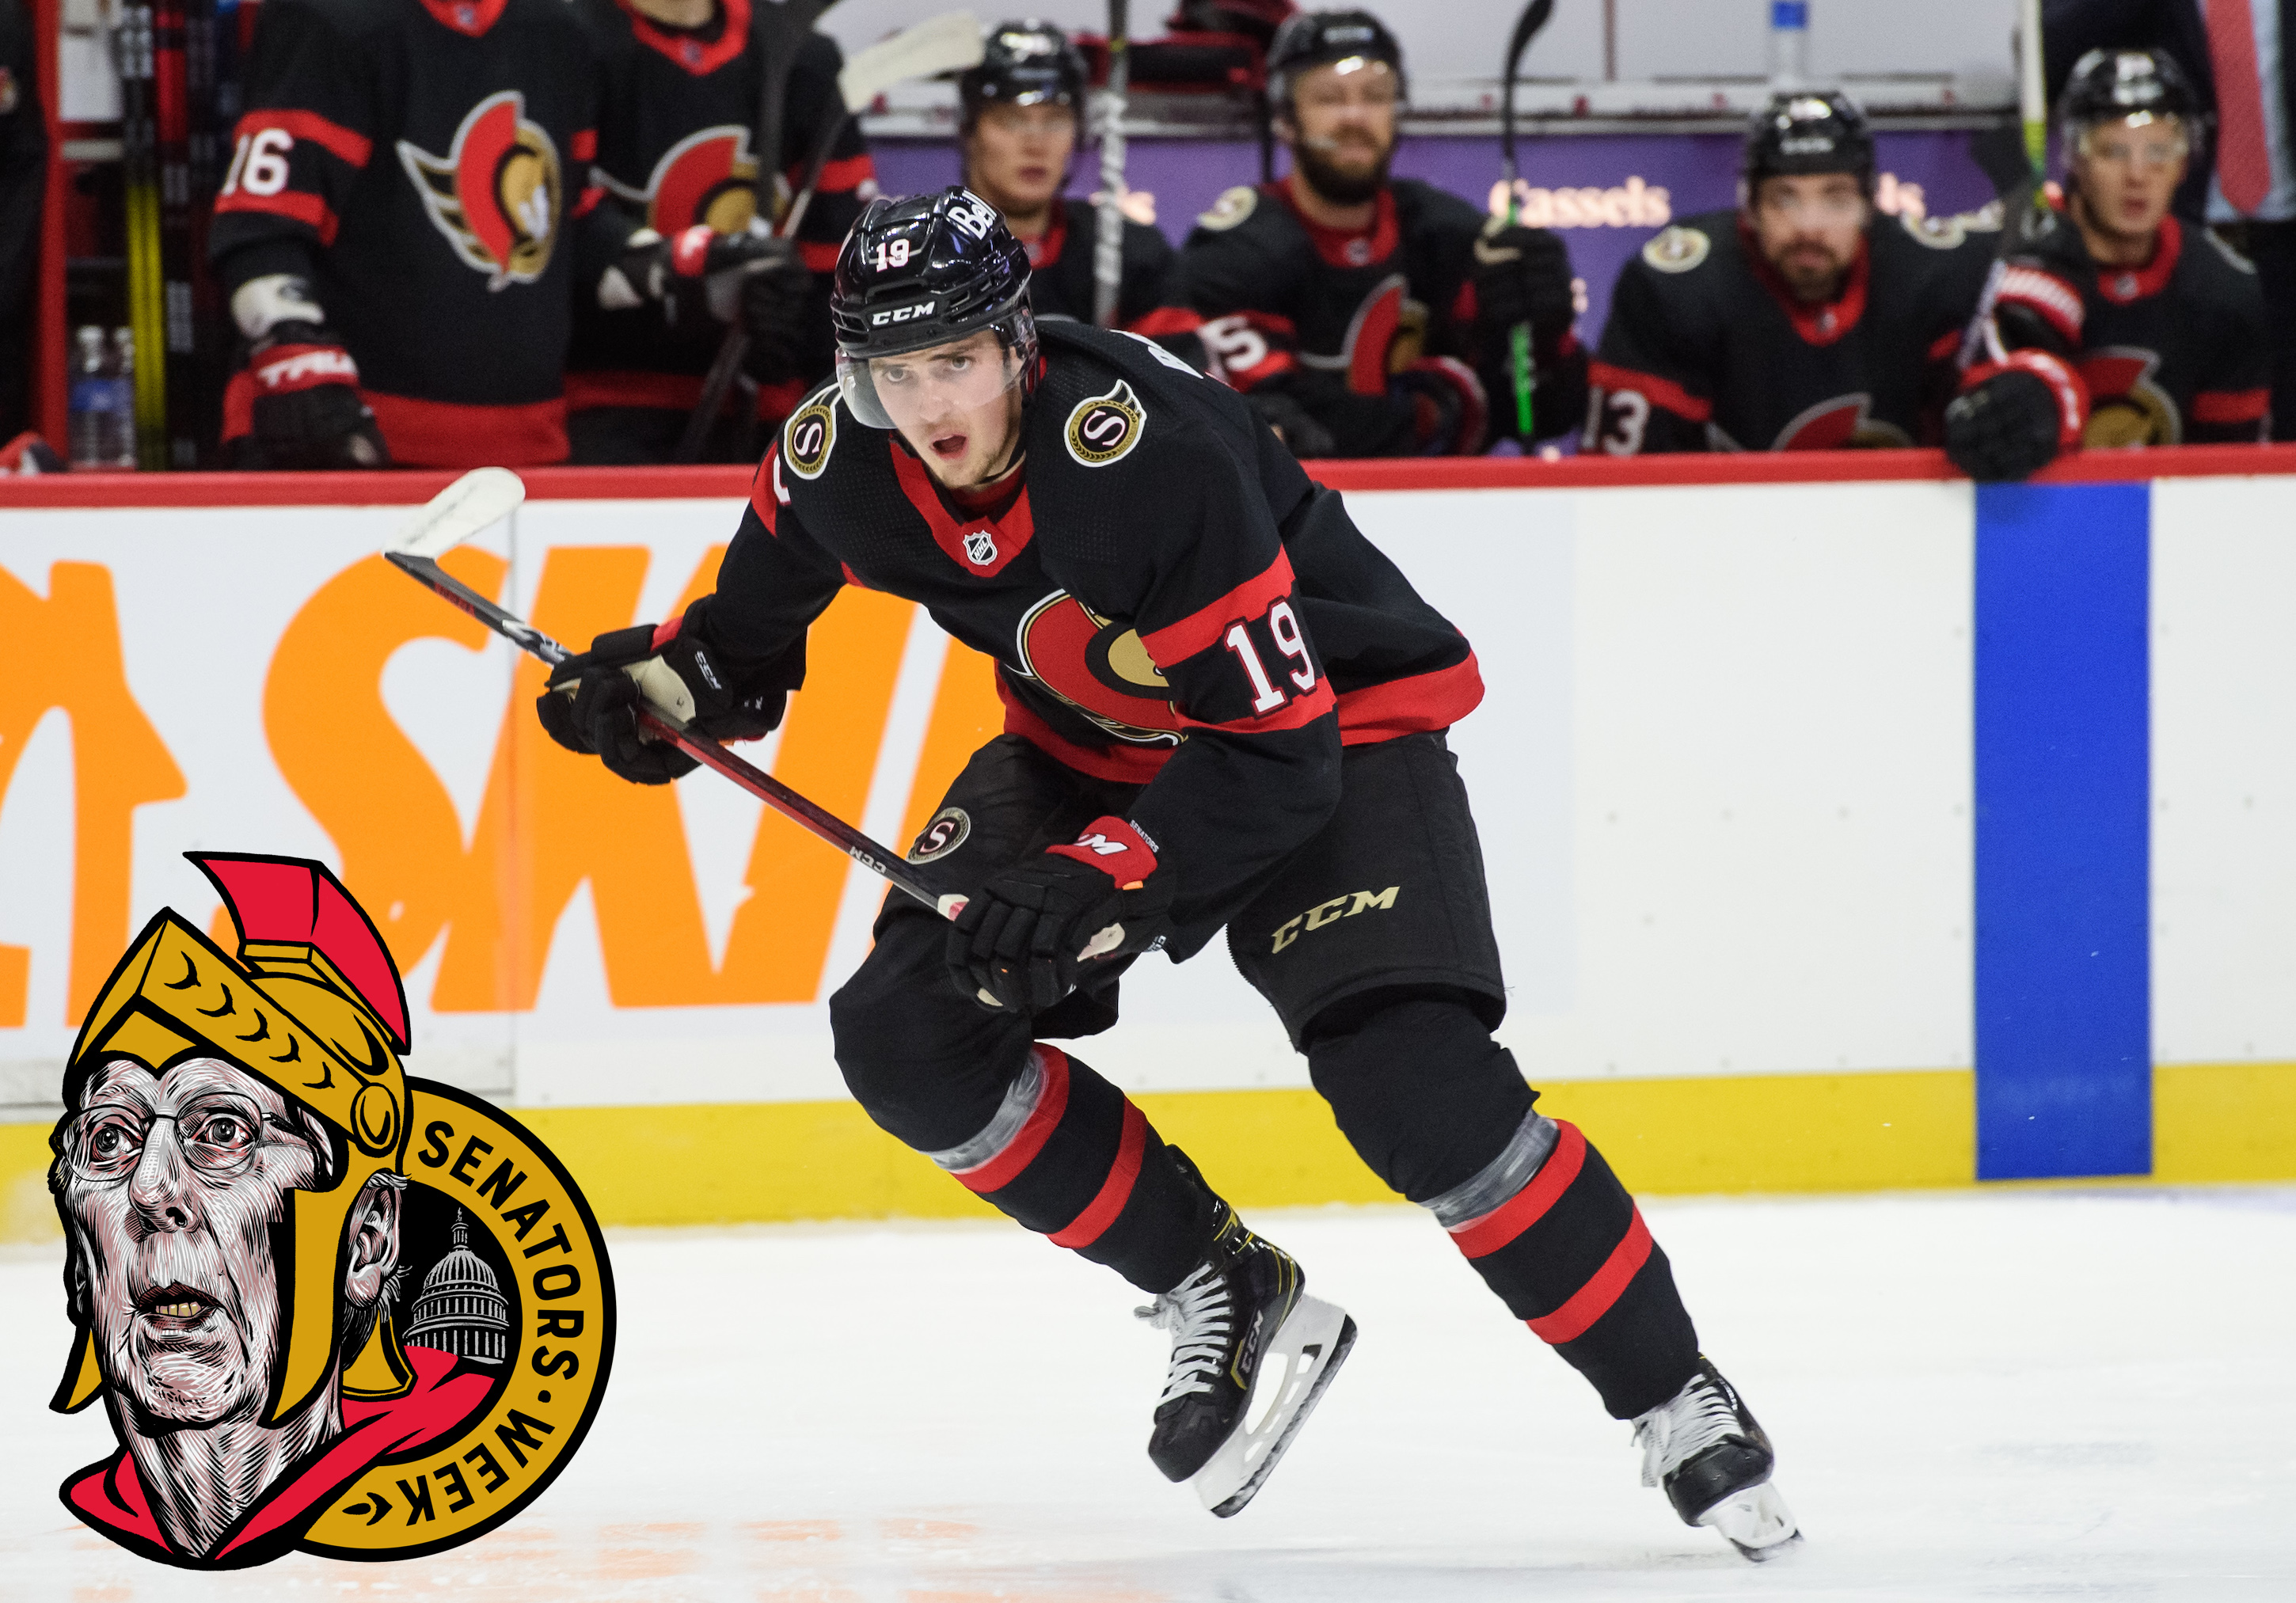 OAW: 'We want to win' -- Sens' winger Drake Batherson looks ahead to home  opener, hotly anticipated season